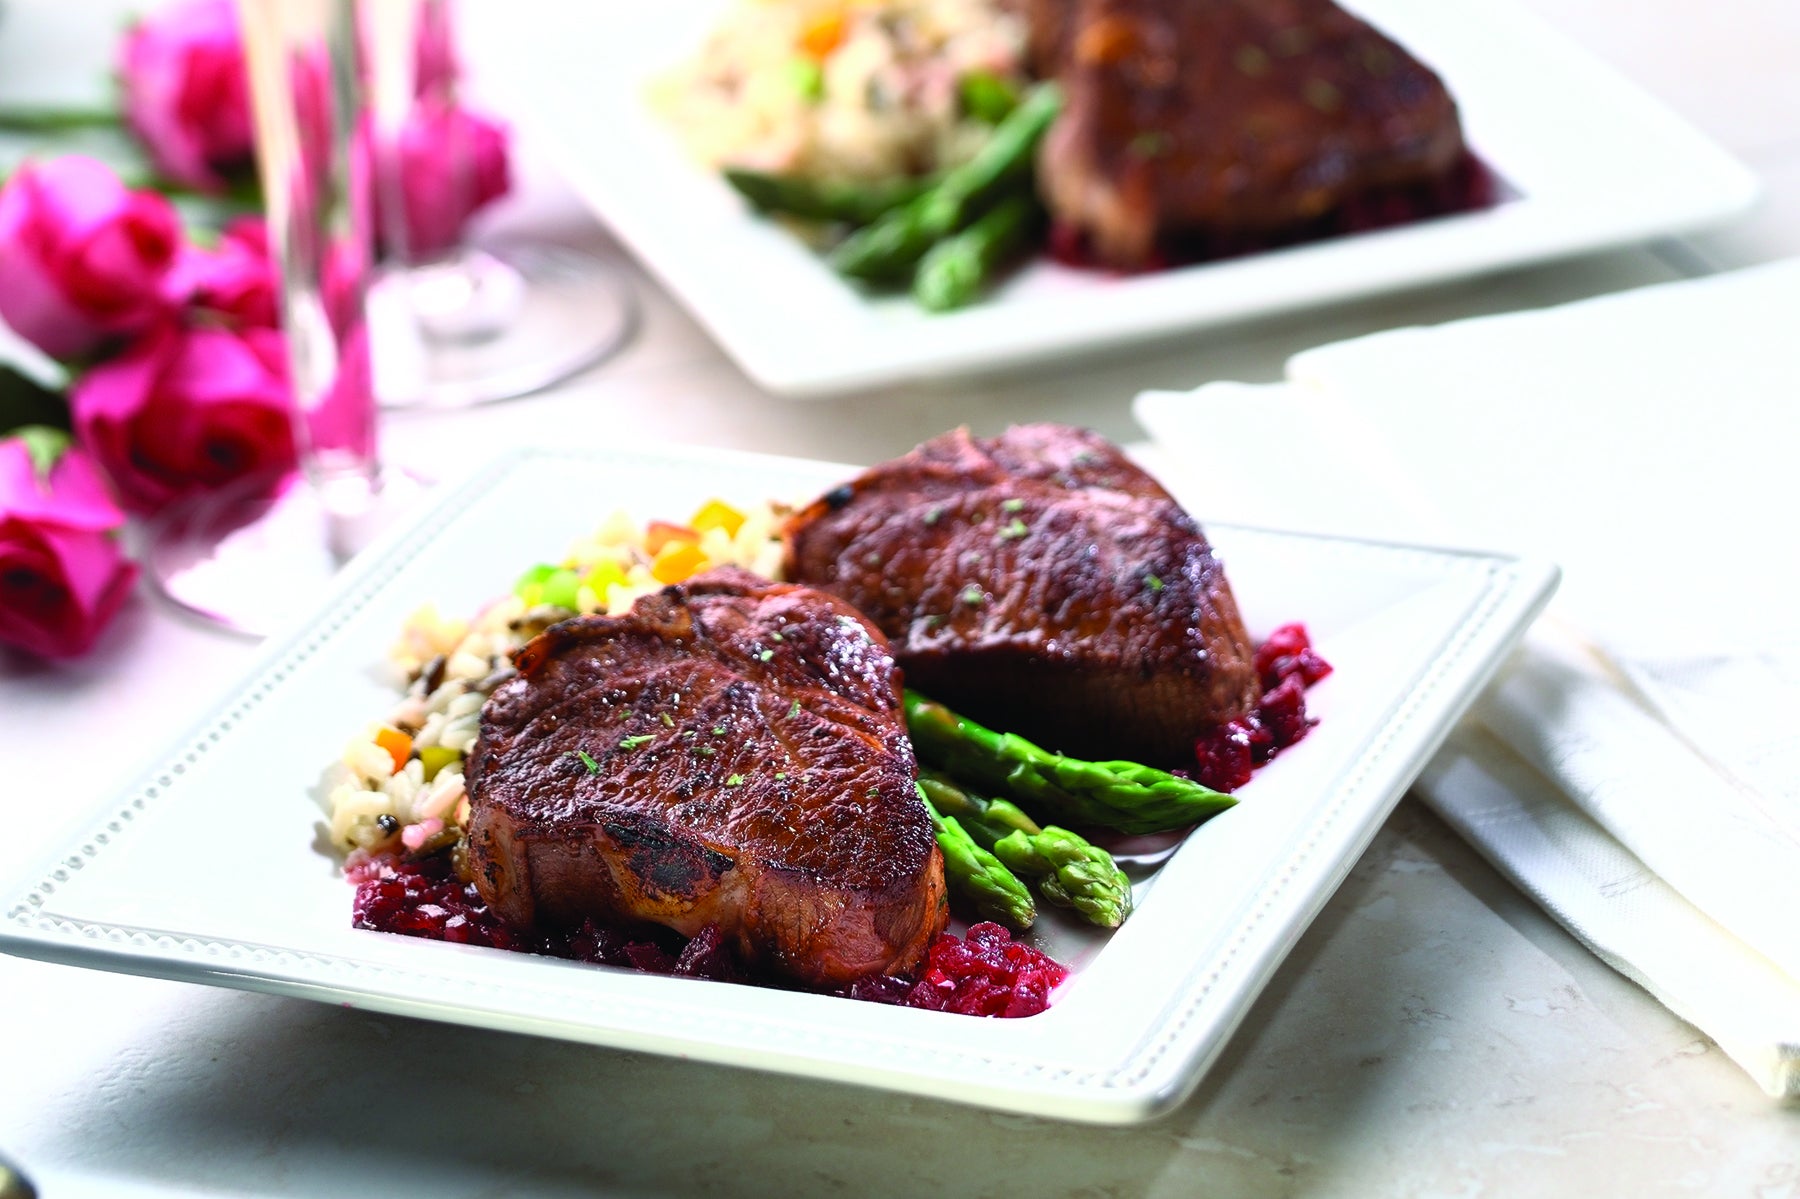 “Table for Two” Lamb Loin Chops with Madeira & Cherries